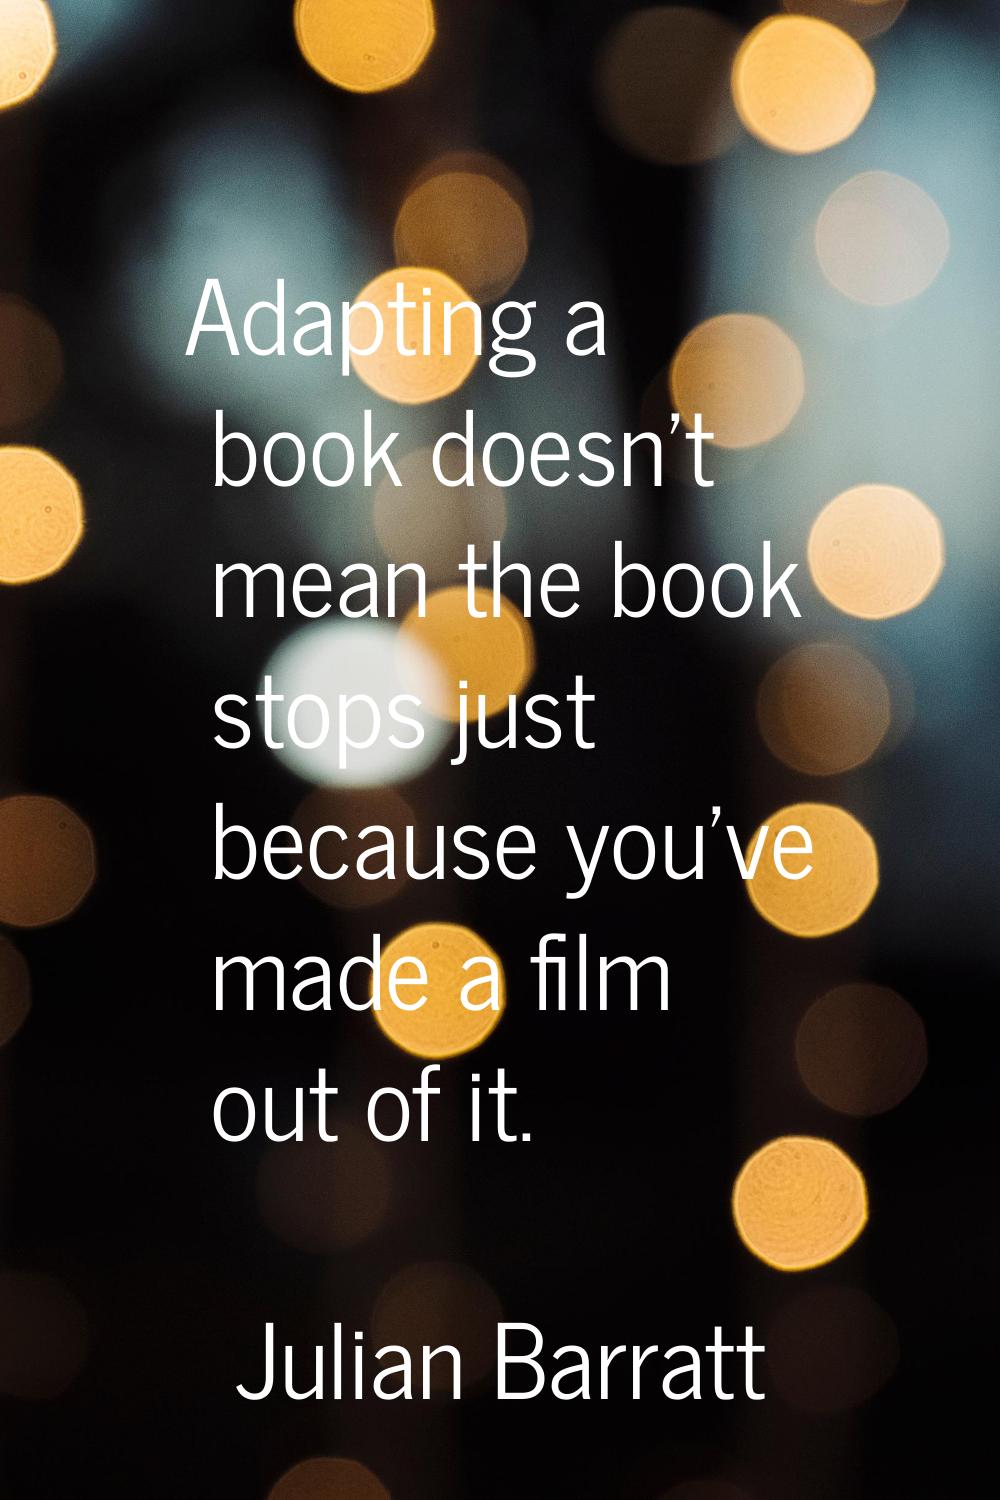 Adapting a book doesn't mean the book stops just because you've made a film out of it.